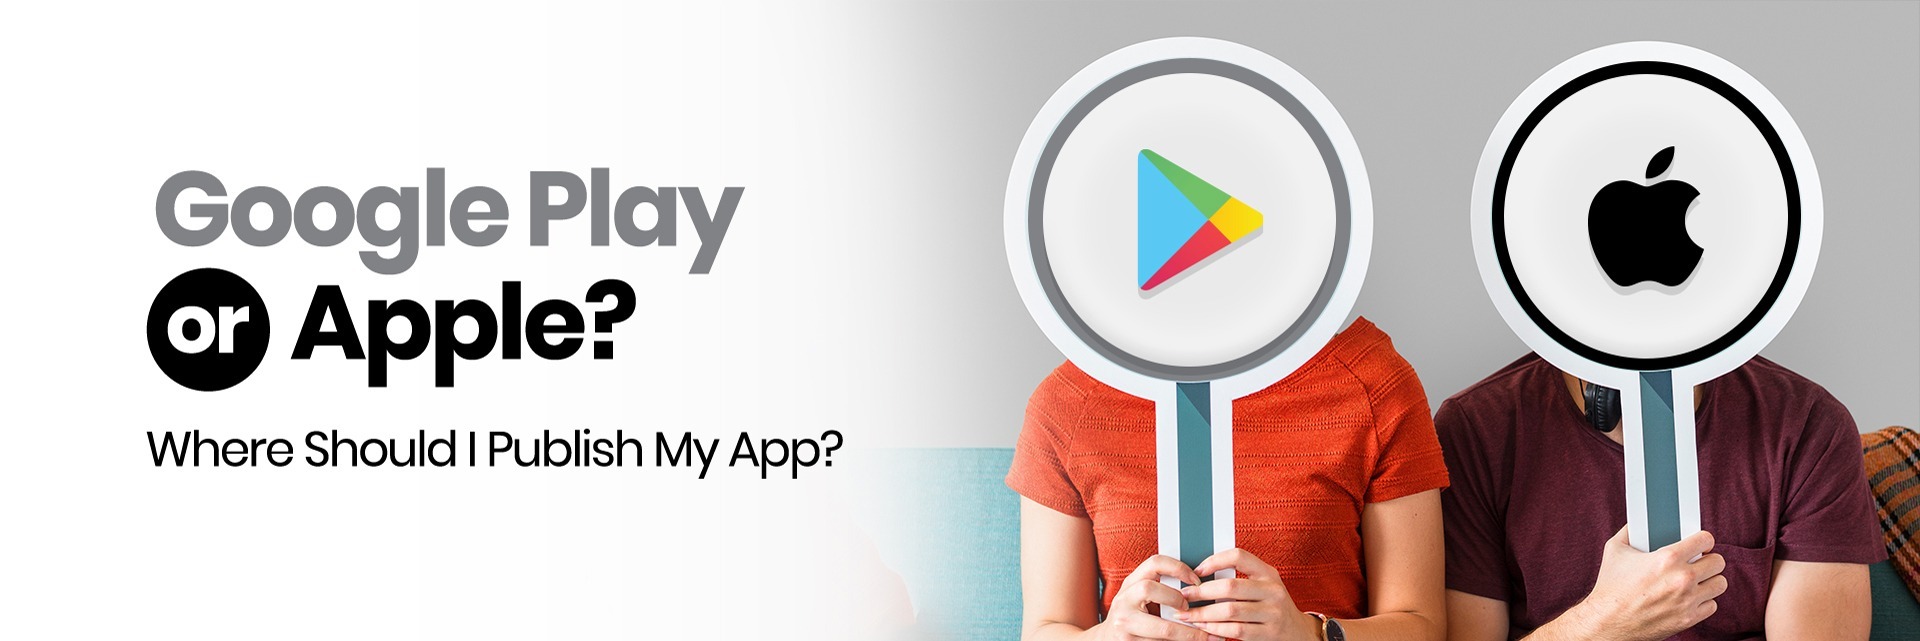 Google Play or Apple? Where Should I Publish My App?